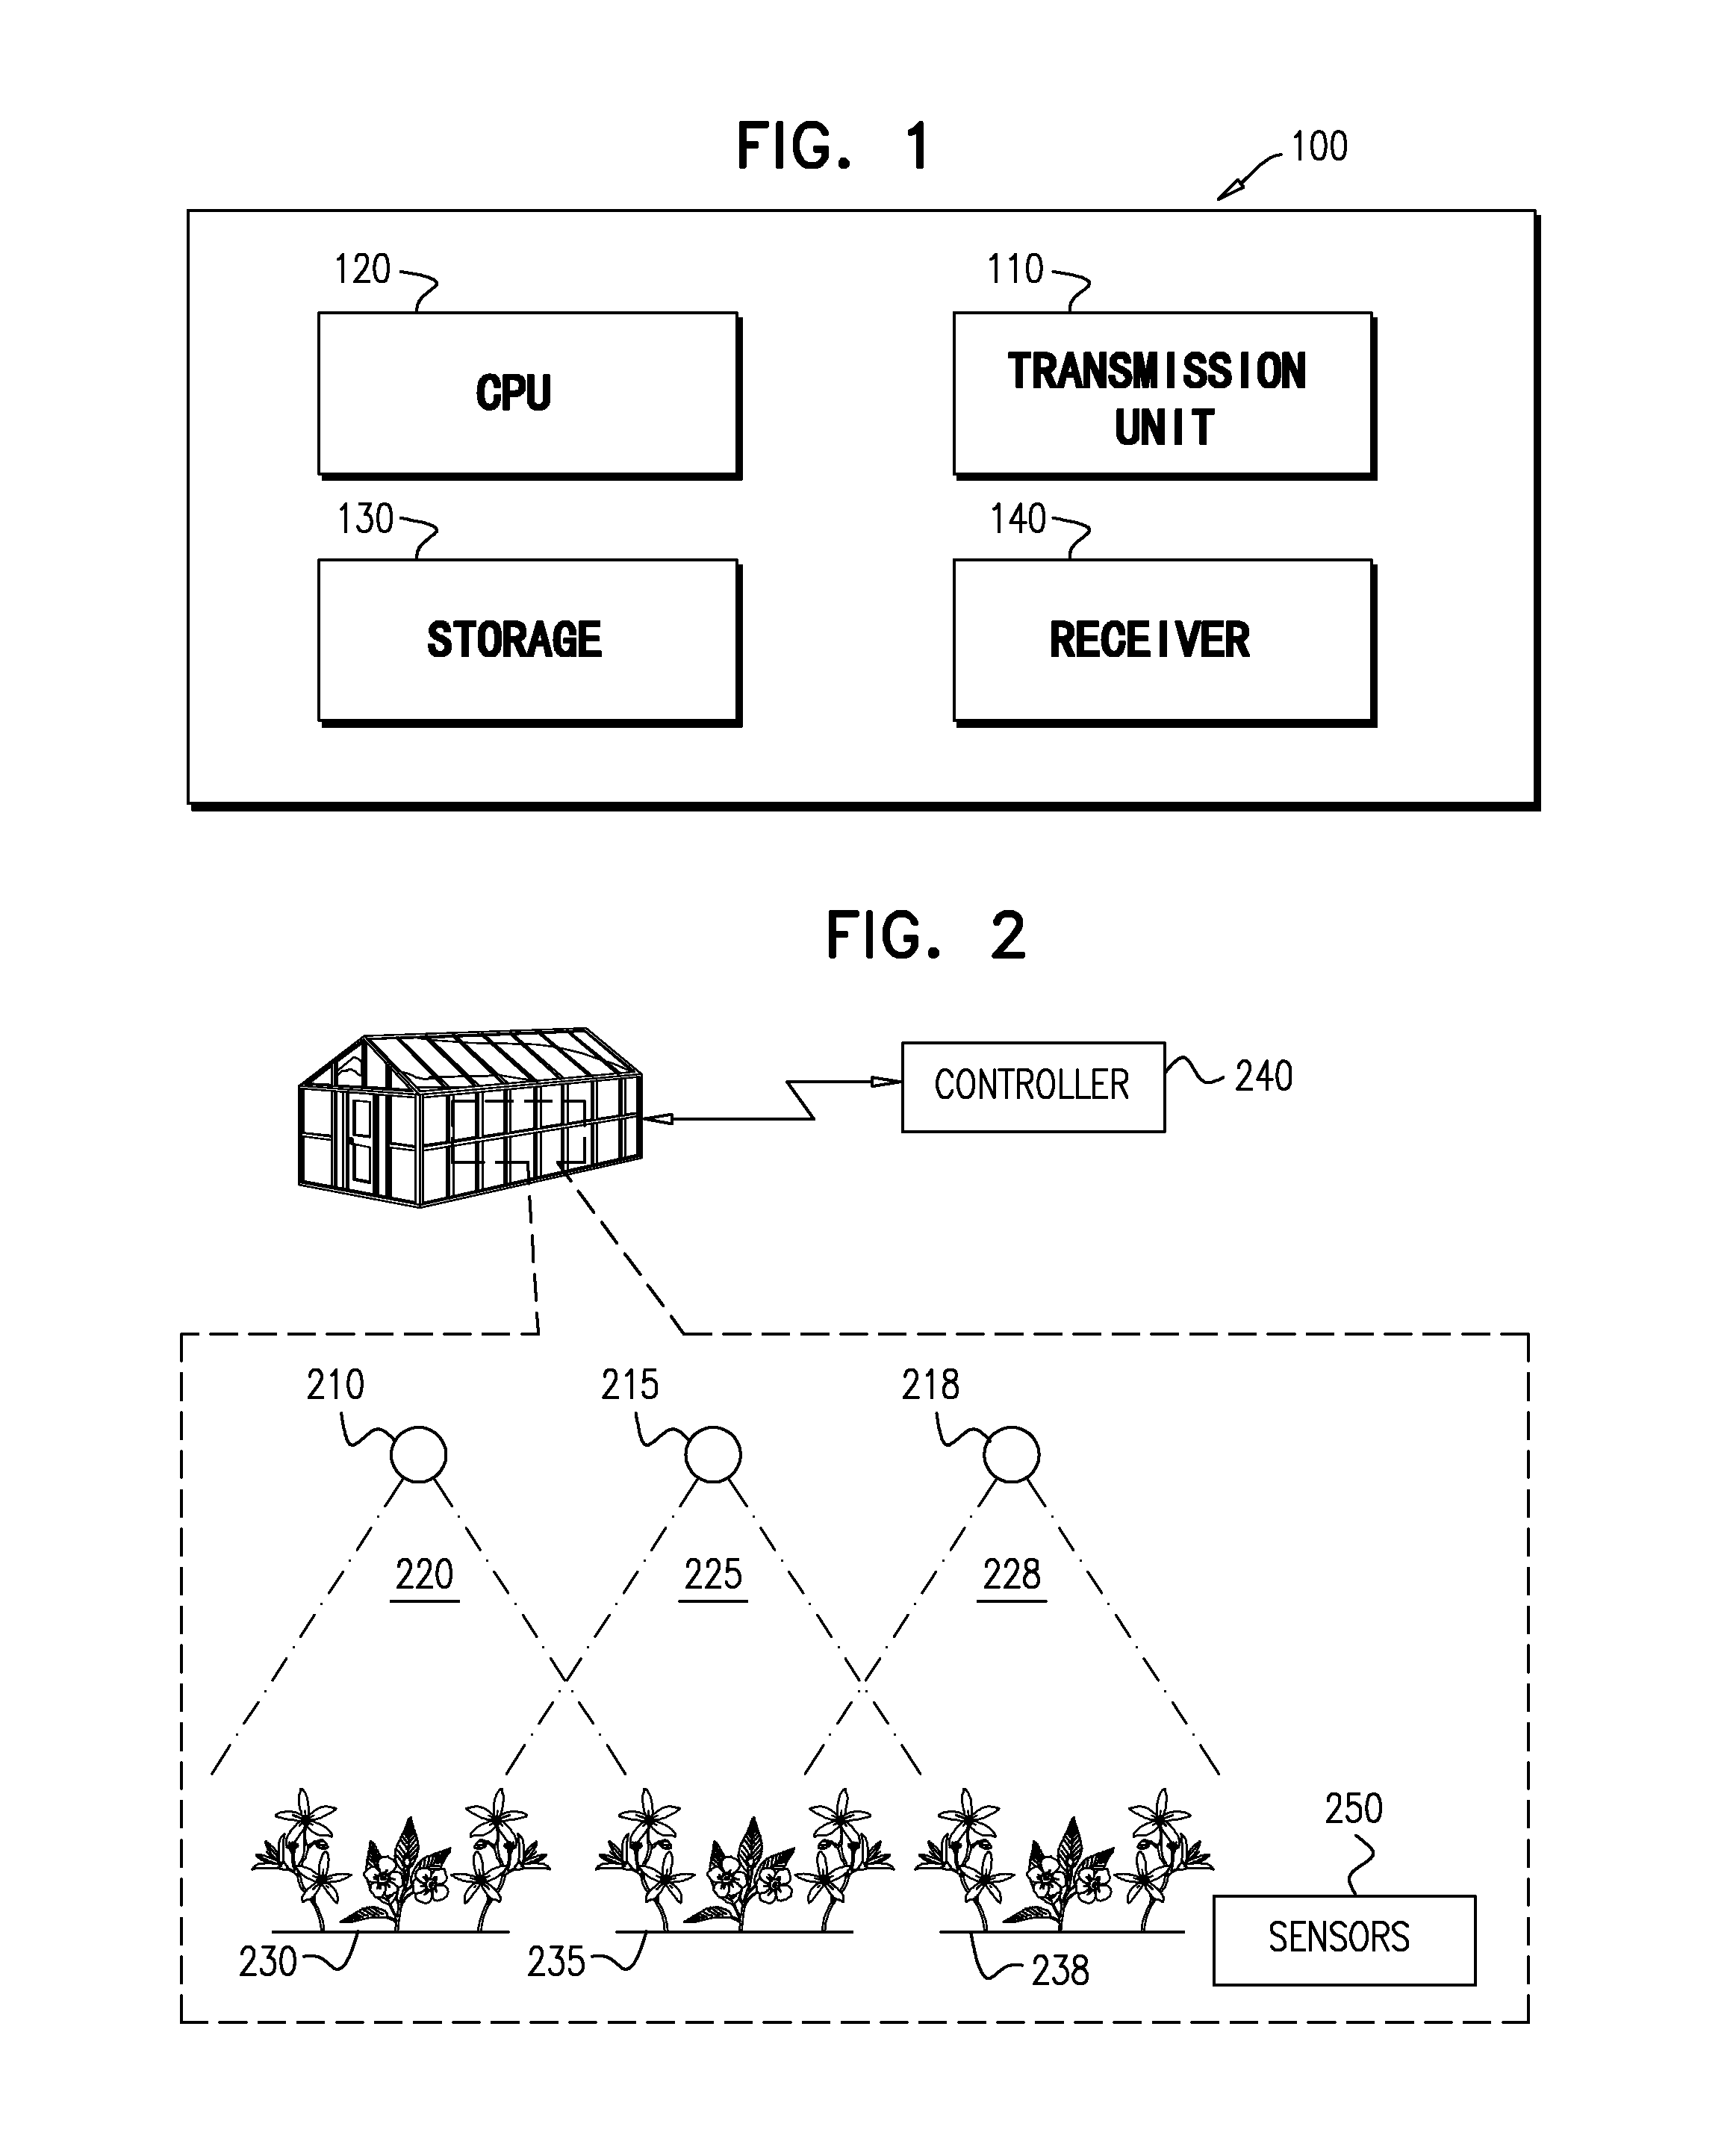 A system and method for providing illumination to plants